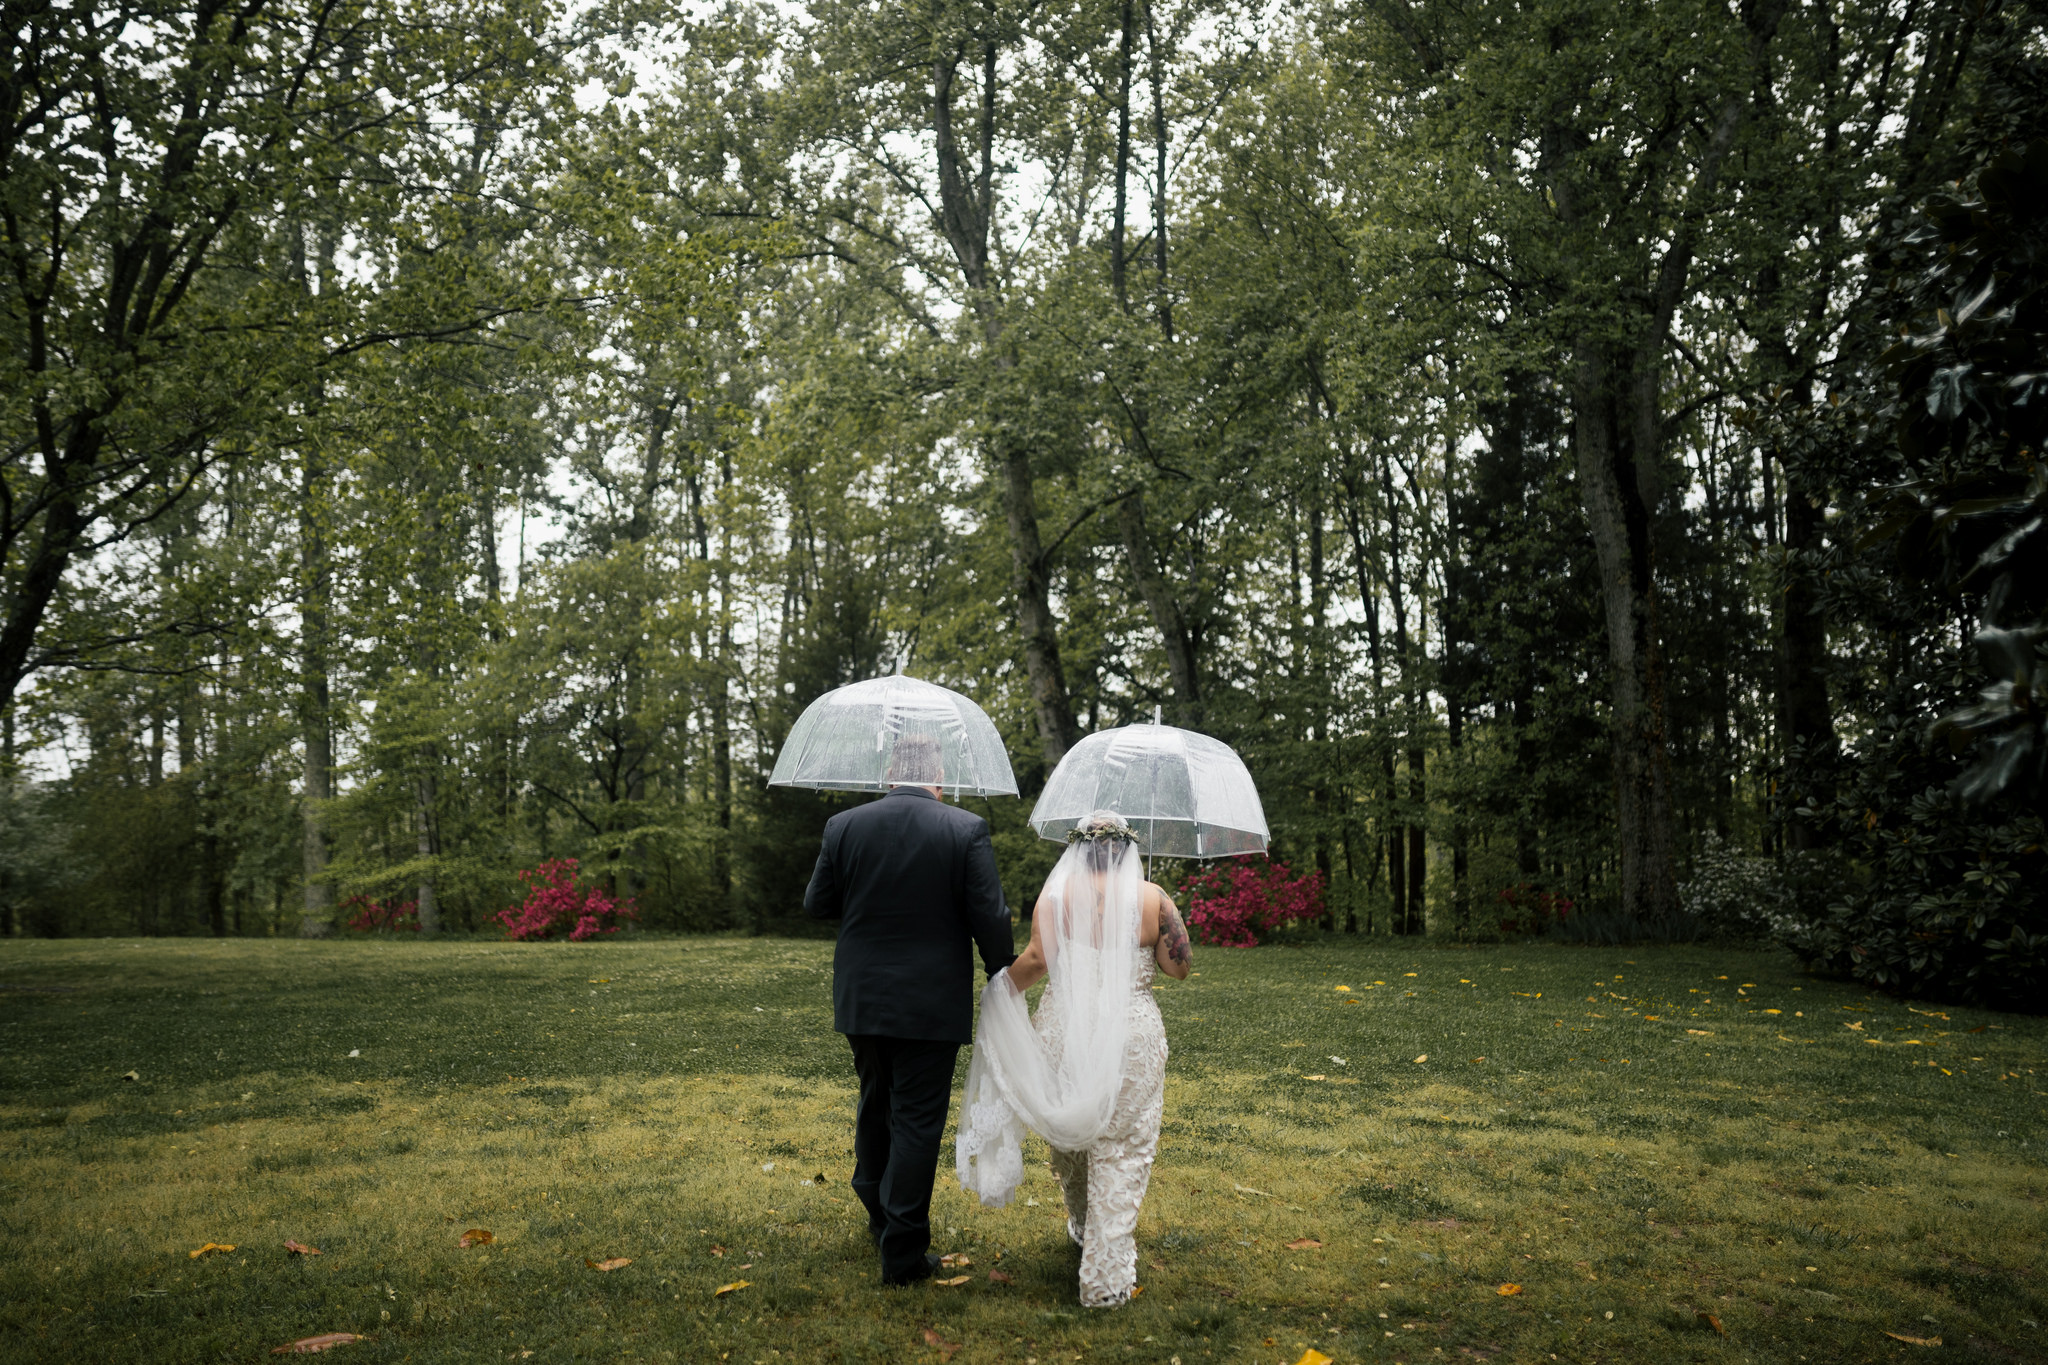 a couple walks through a field using clear wedding umbrellas for rain while the groom holds the brides train up and out of the grass